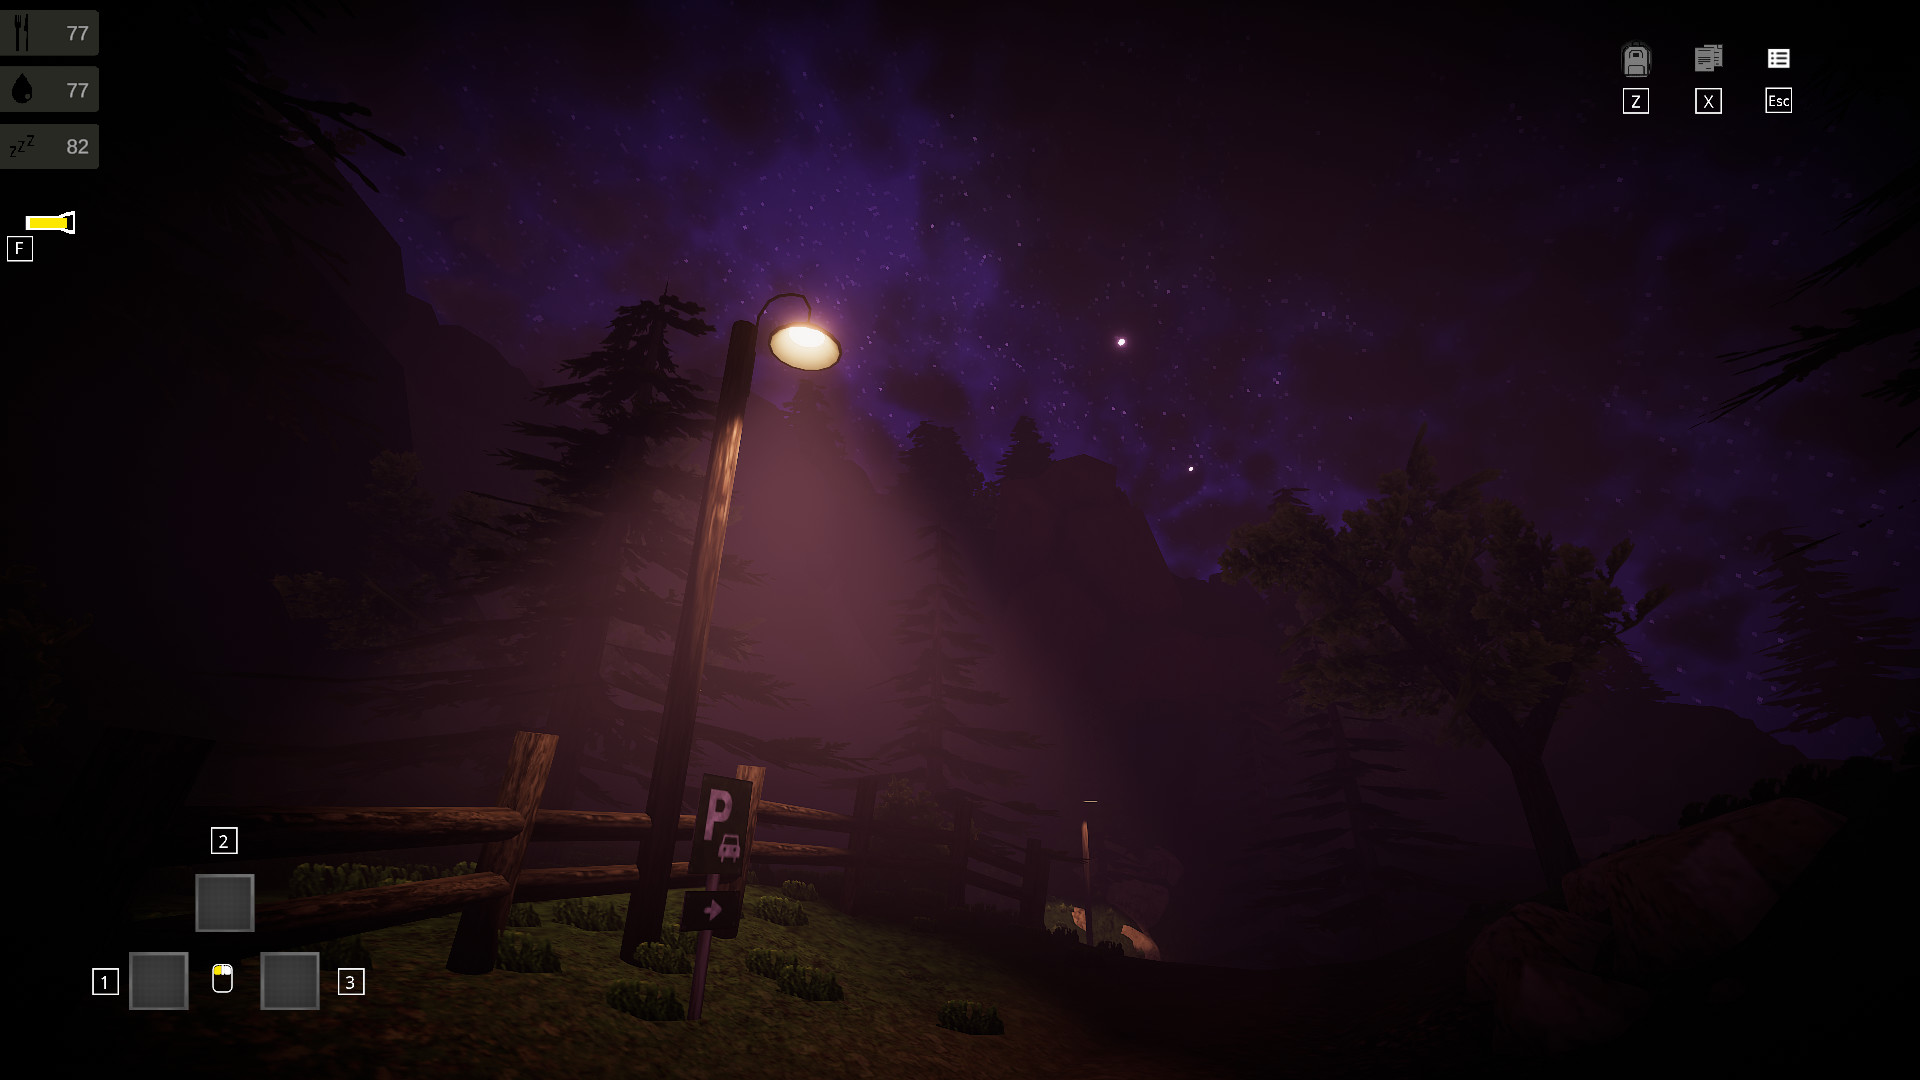 Abducted: The Night Hunters screenshot